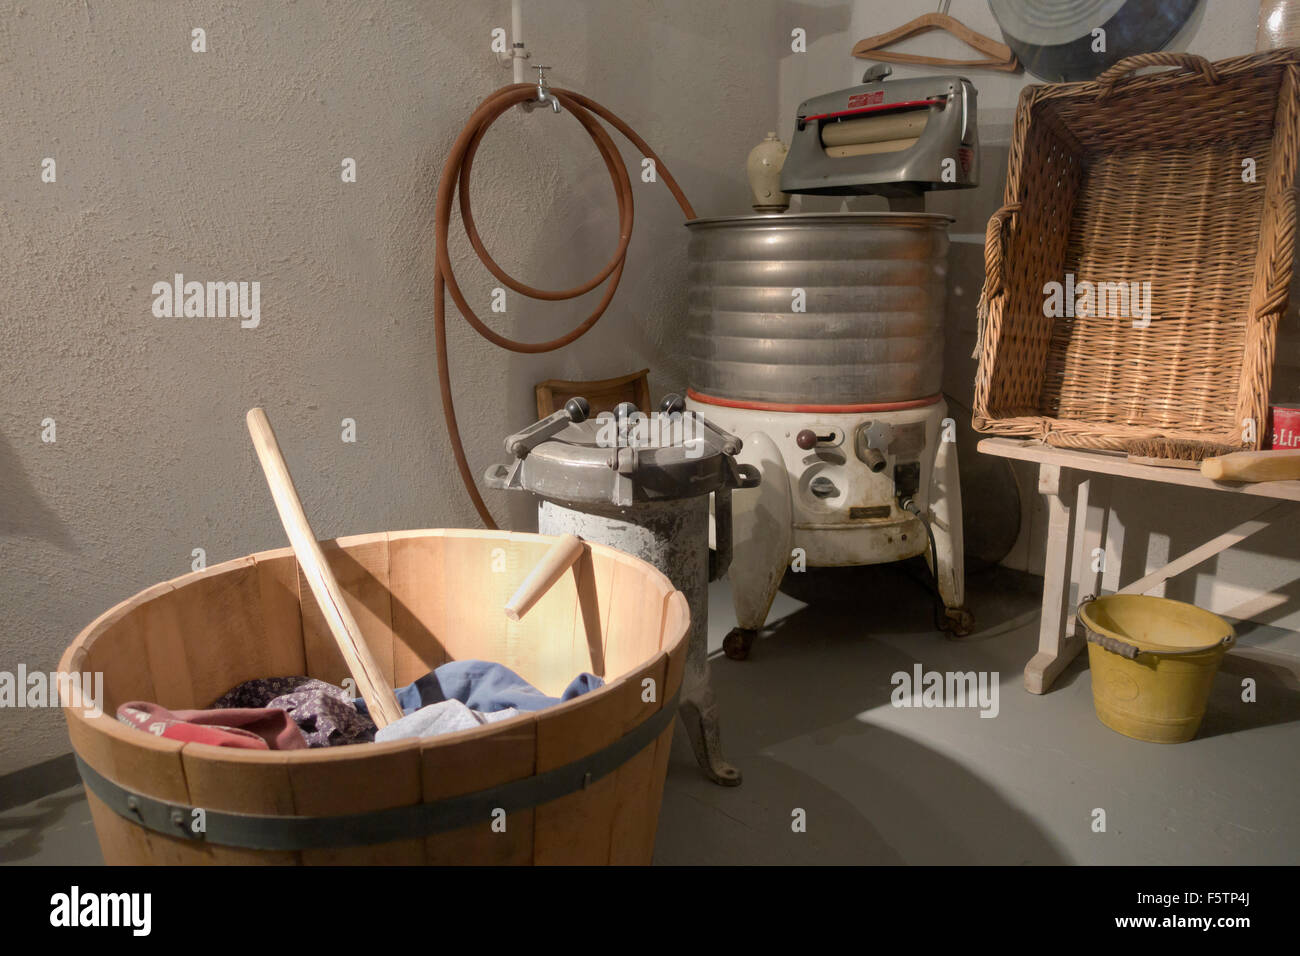 Historic and old -fashioned laundry room well into the 1950s. The Workers Museum (Arbejdermuseet) Copenhagen, Denmark Stock Photo